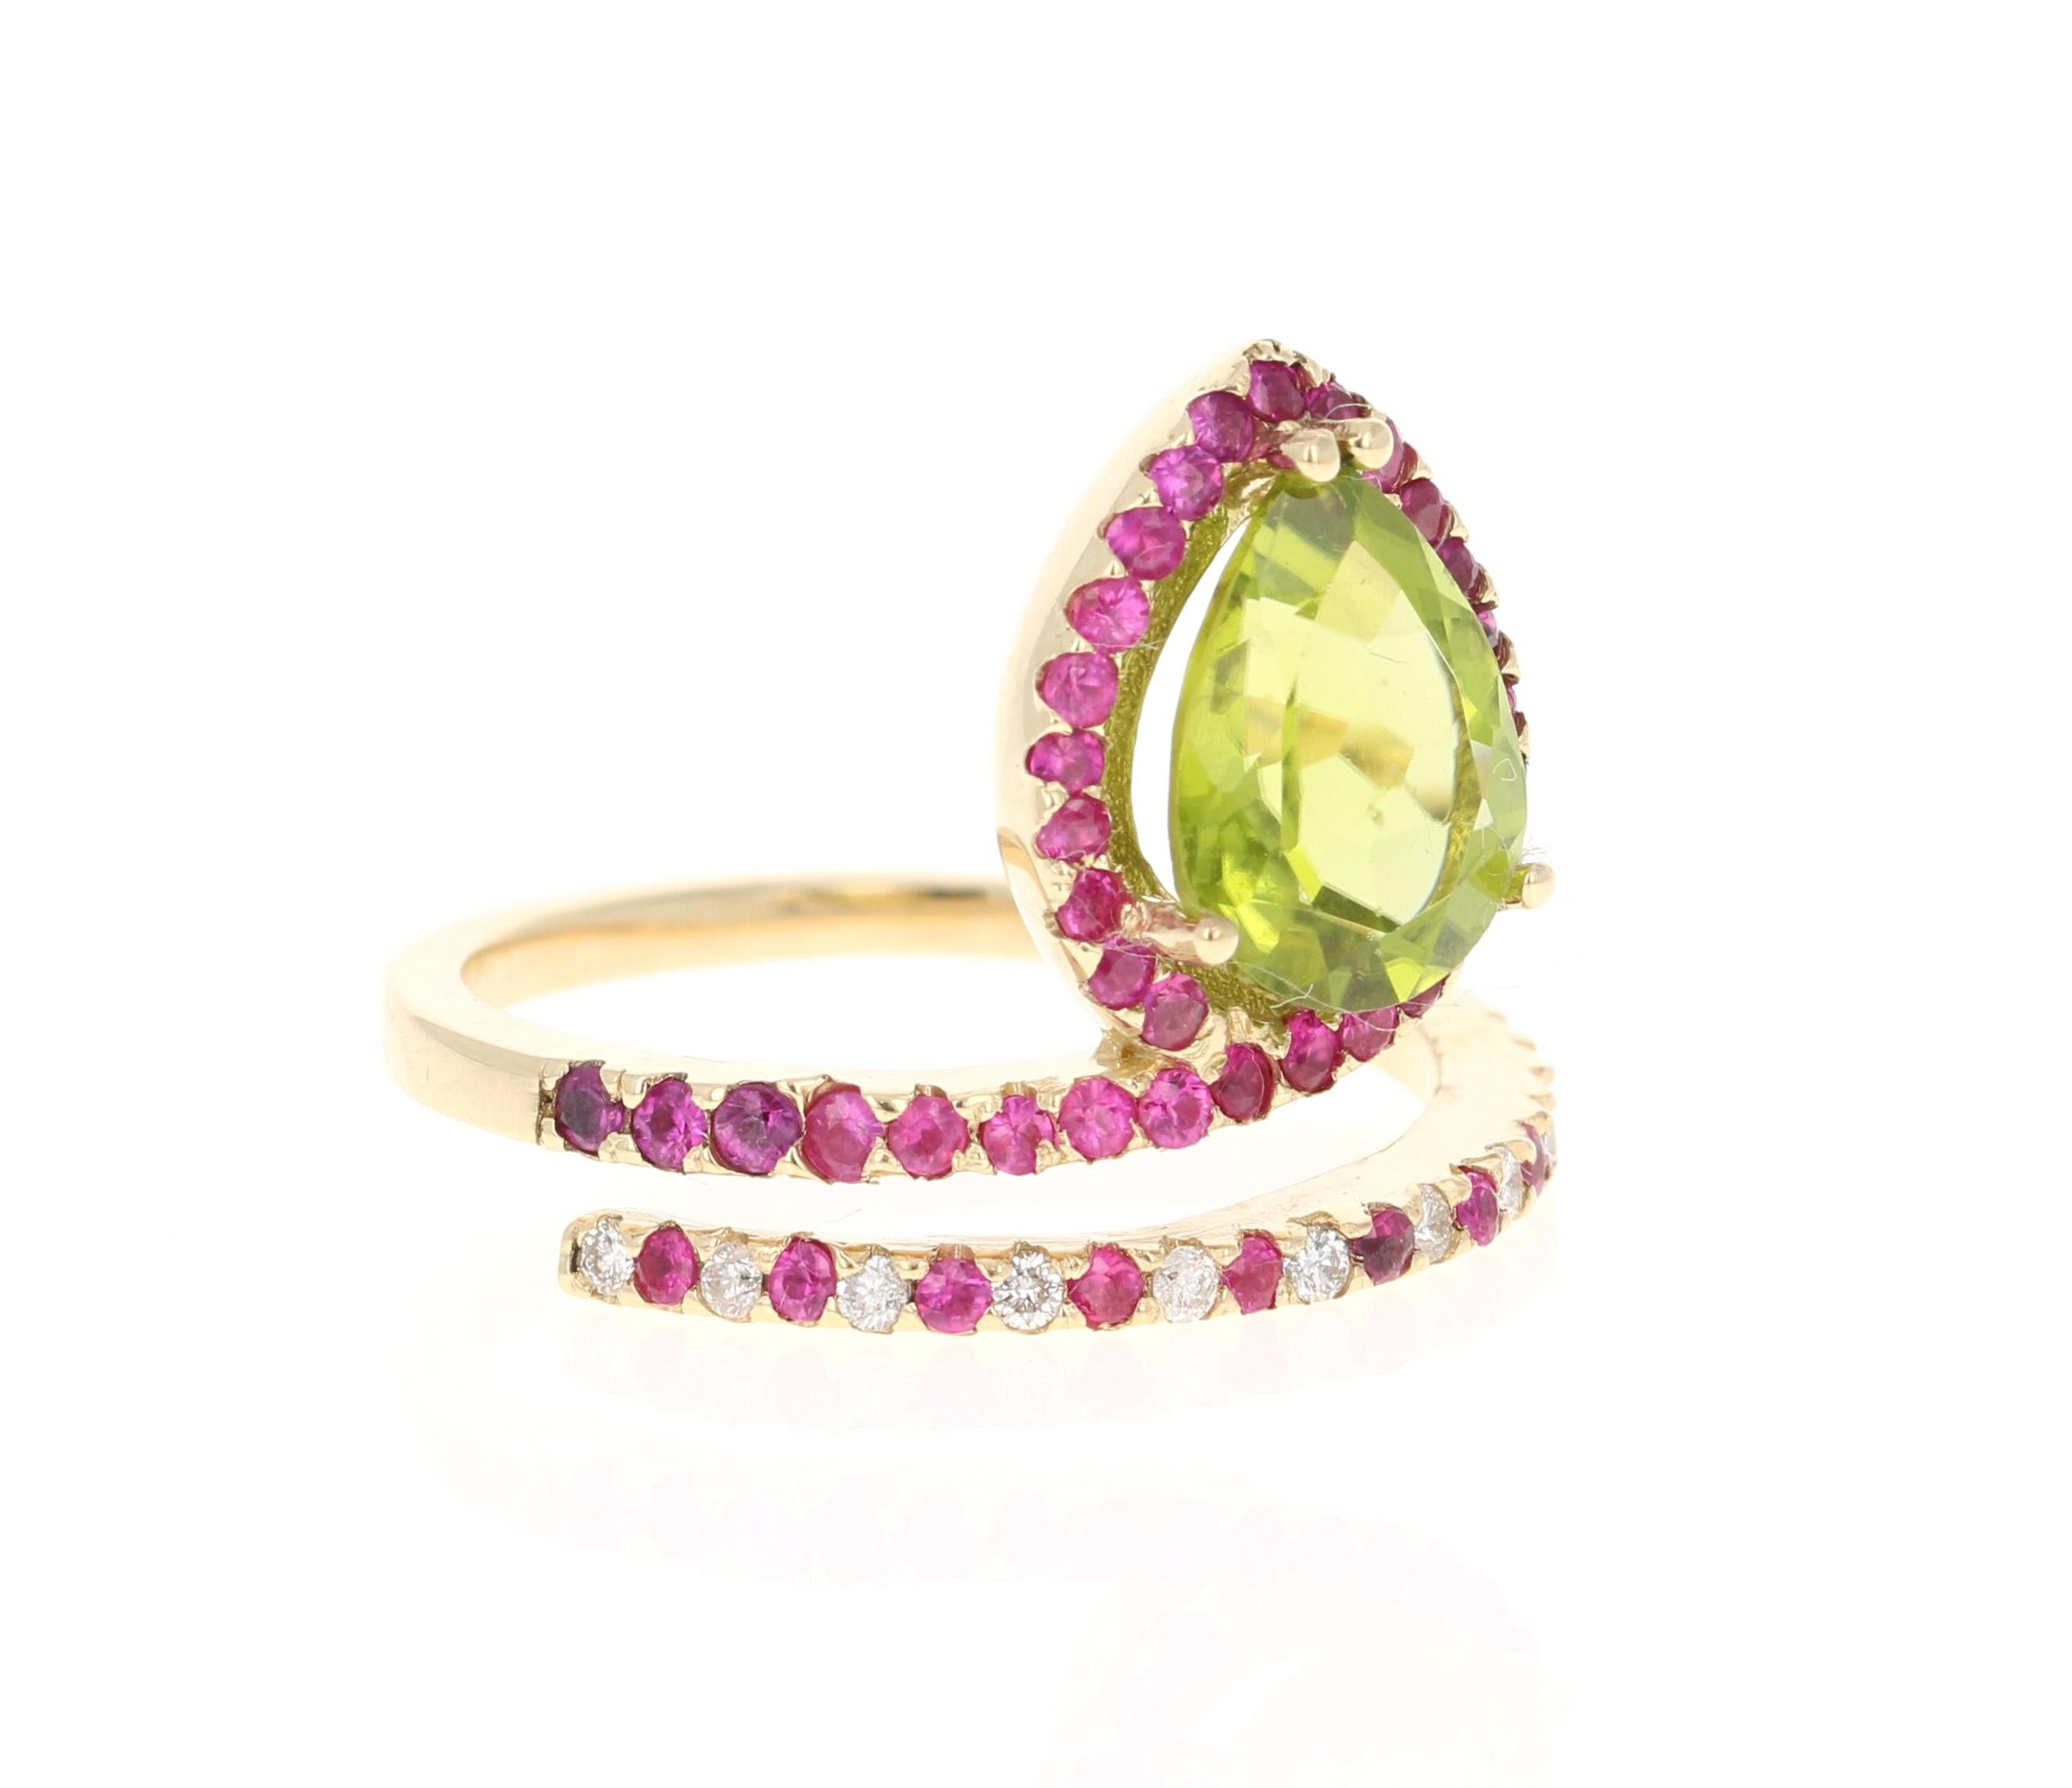 2.94 Carat Peridot Sapphire Diamond 14 Karat Yellow Gold Engagement Ring
This beautiful ring has a Pear Cut Peridot in the center that weighs 2.19 carats. The ring is surrounded by a Halo of Pink Sapphires and wraps around with alternating Diamonds